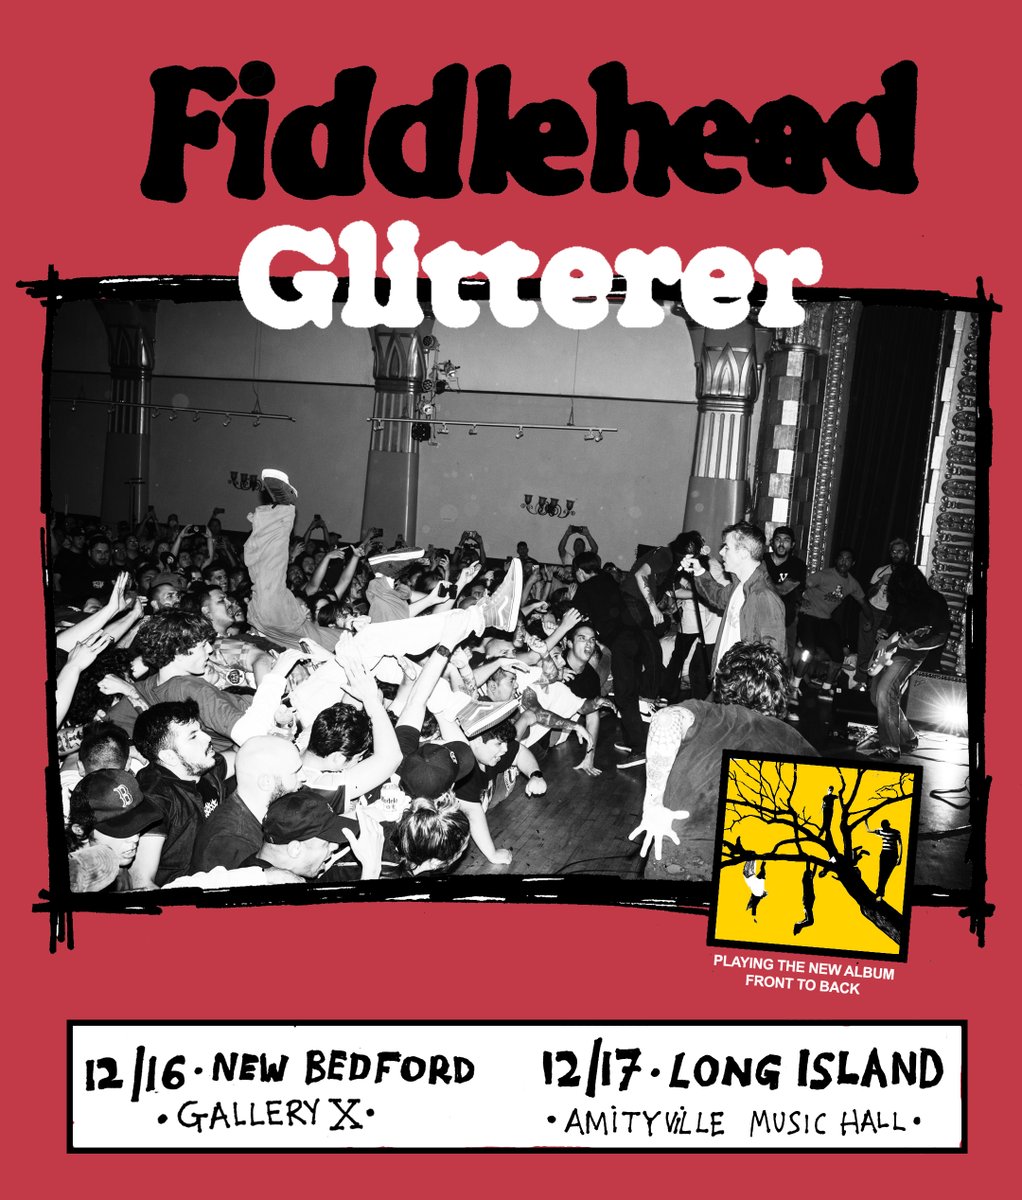 New shows: New Bedford and Long Island with Fiddlehead this December